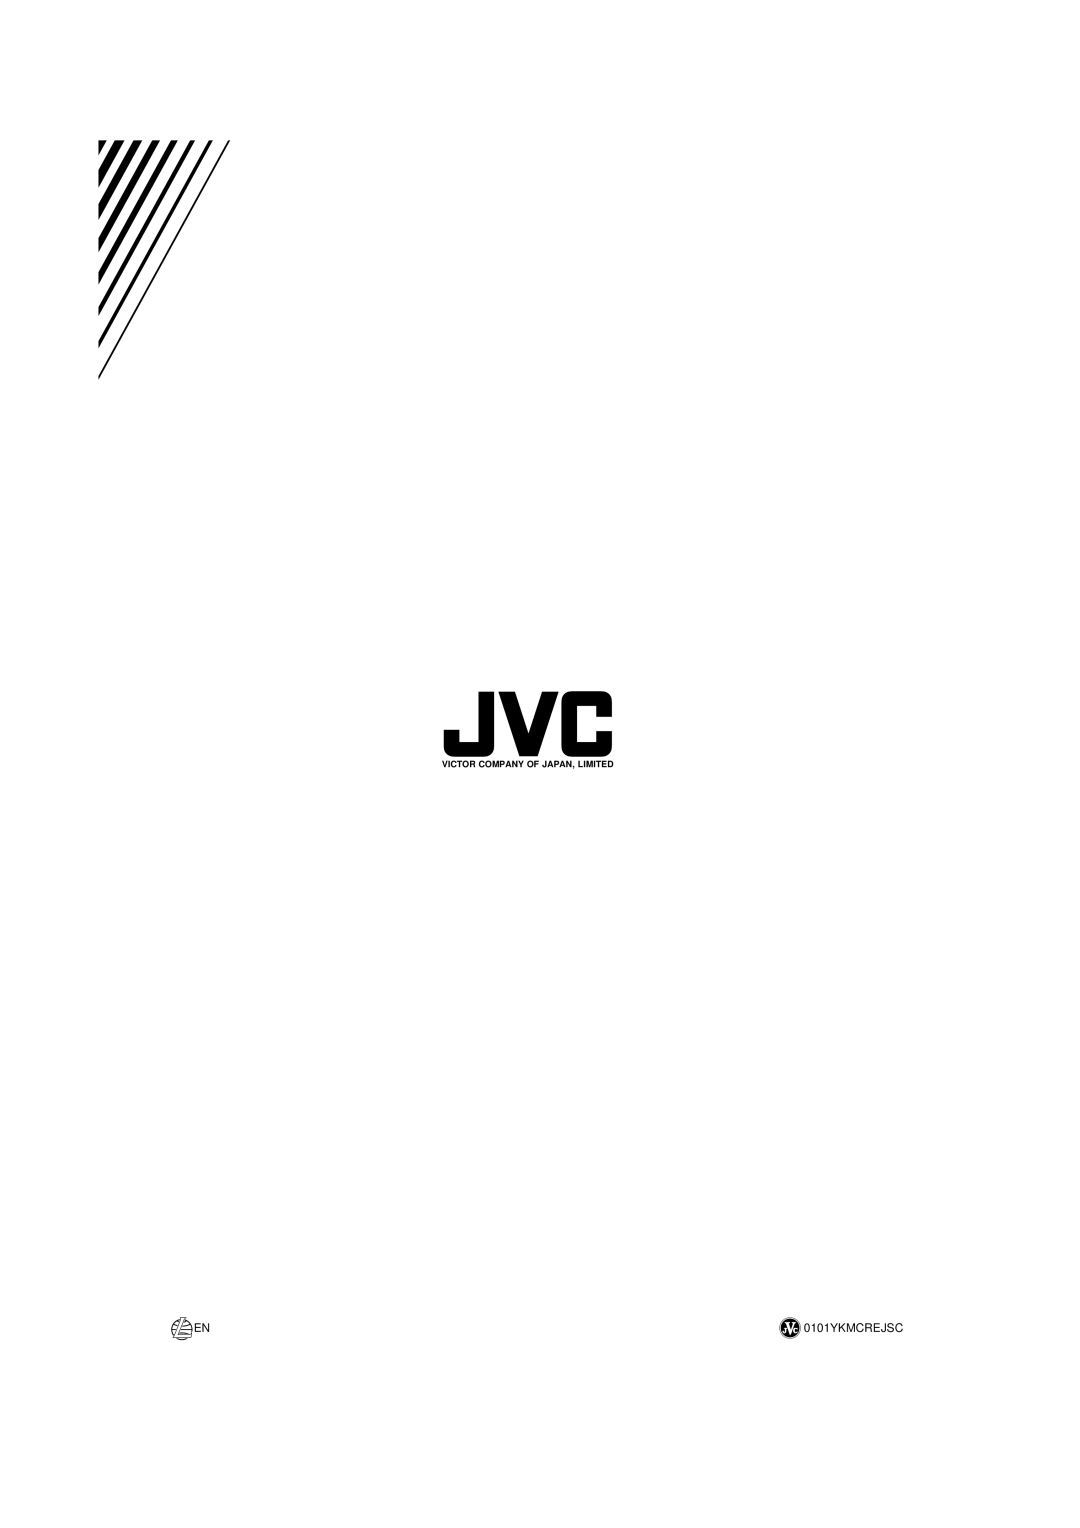 JVC TH-A9 manual 0101YKMCREJSC, Victor Company Of Japan, Limited 